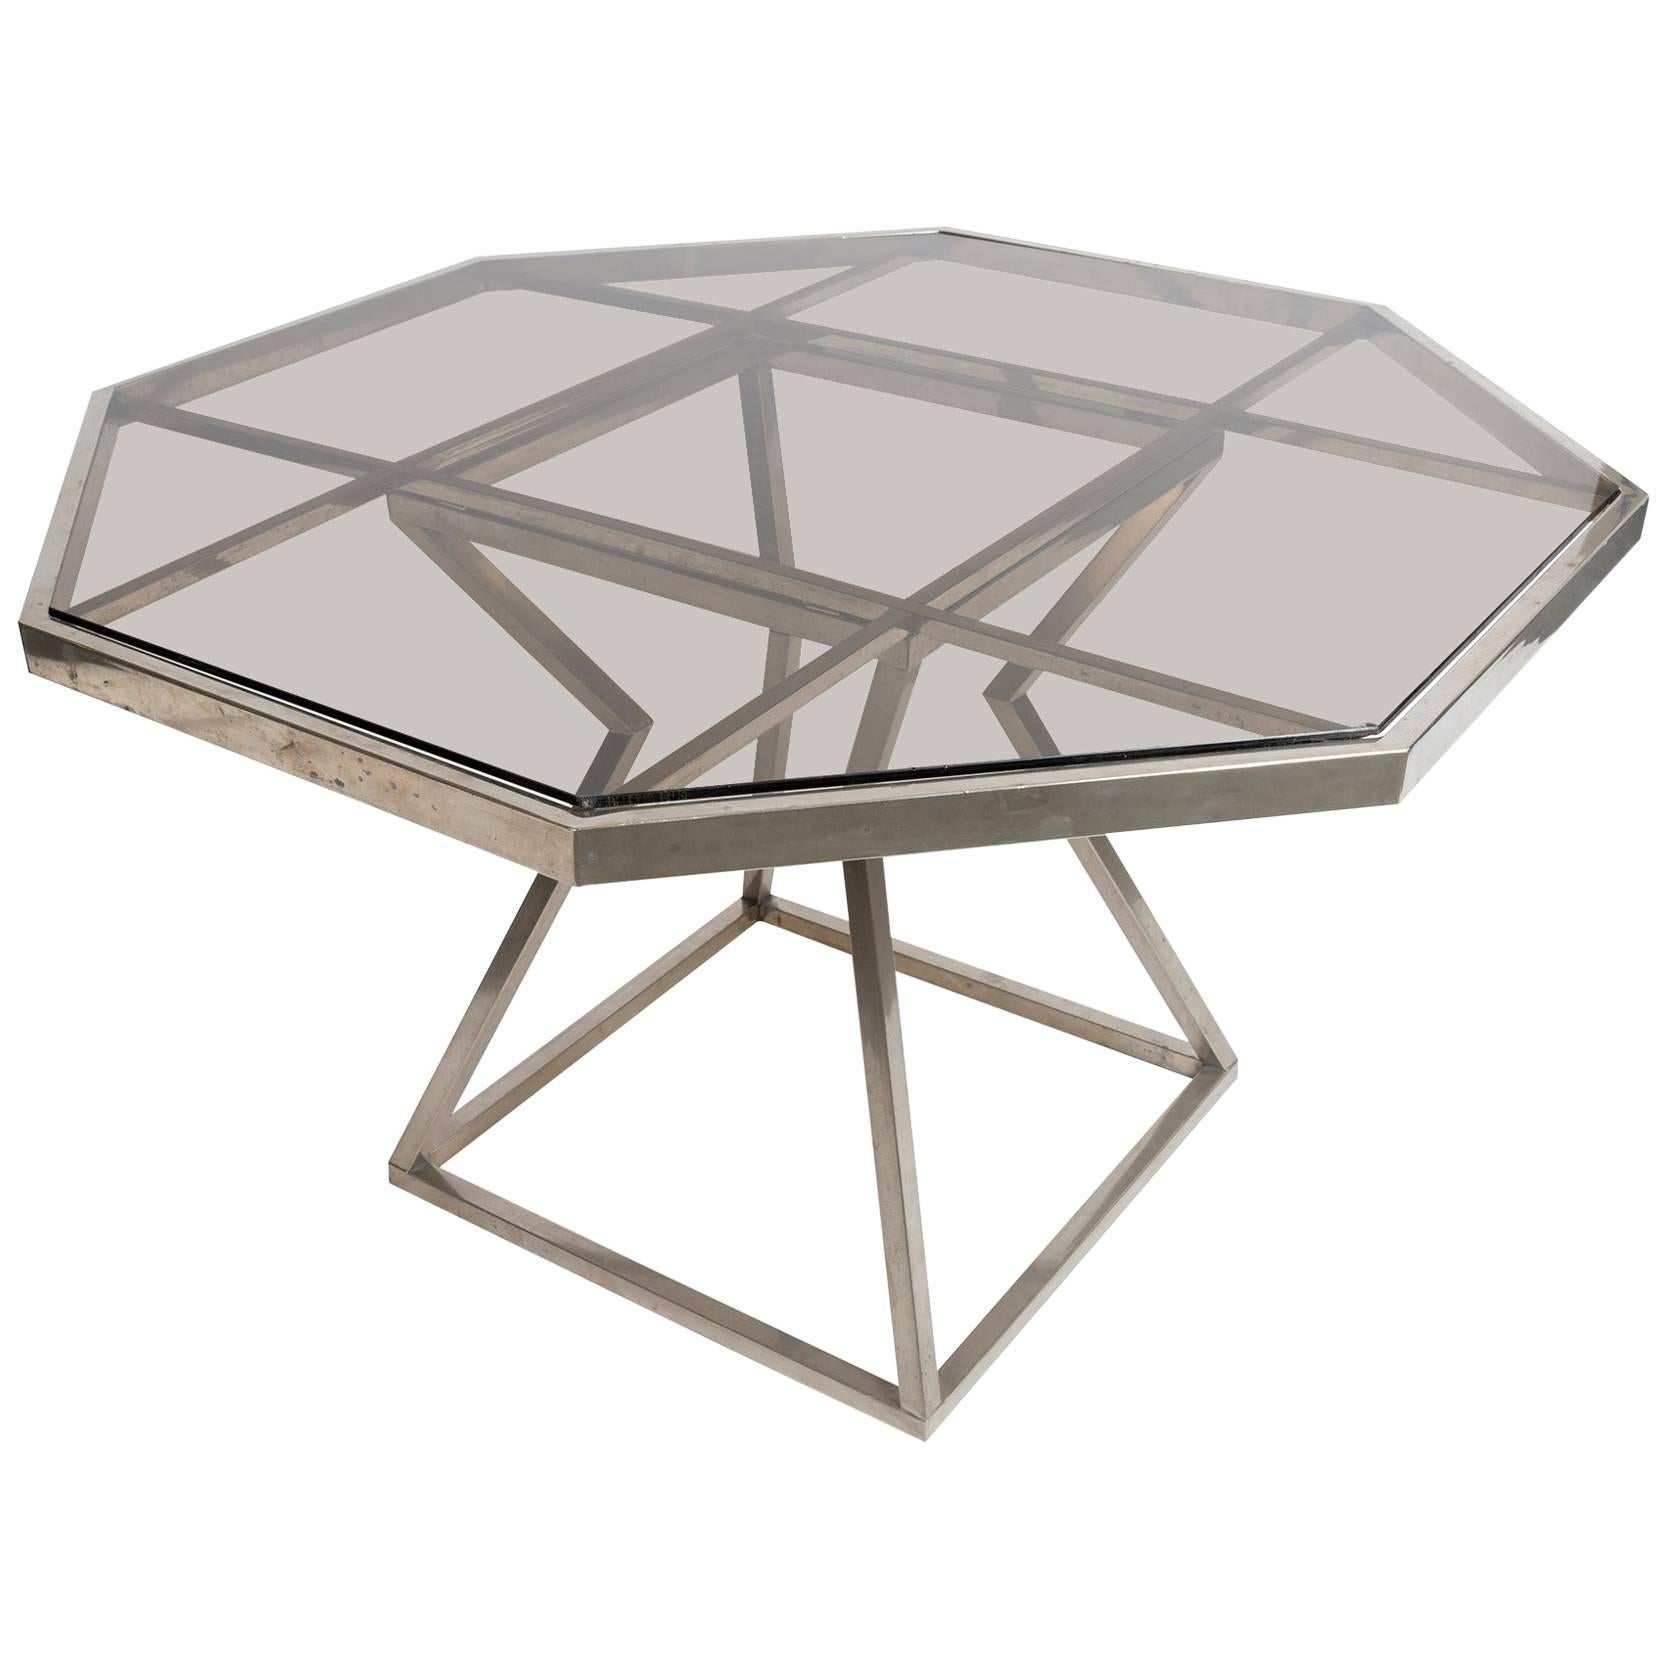 Octagonal Agente Dining Table